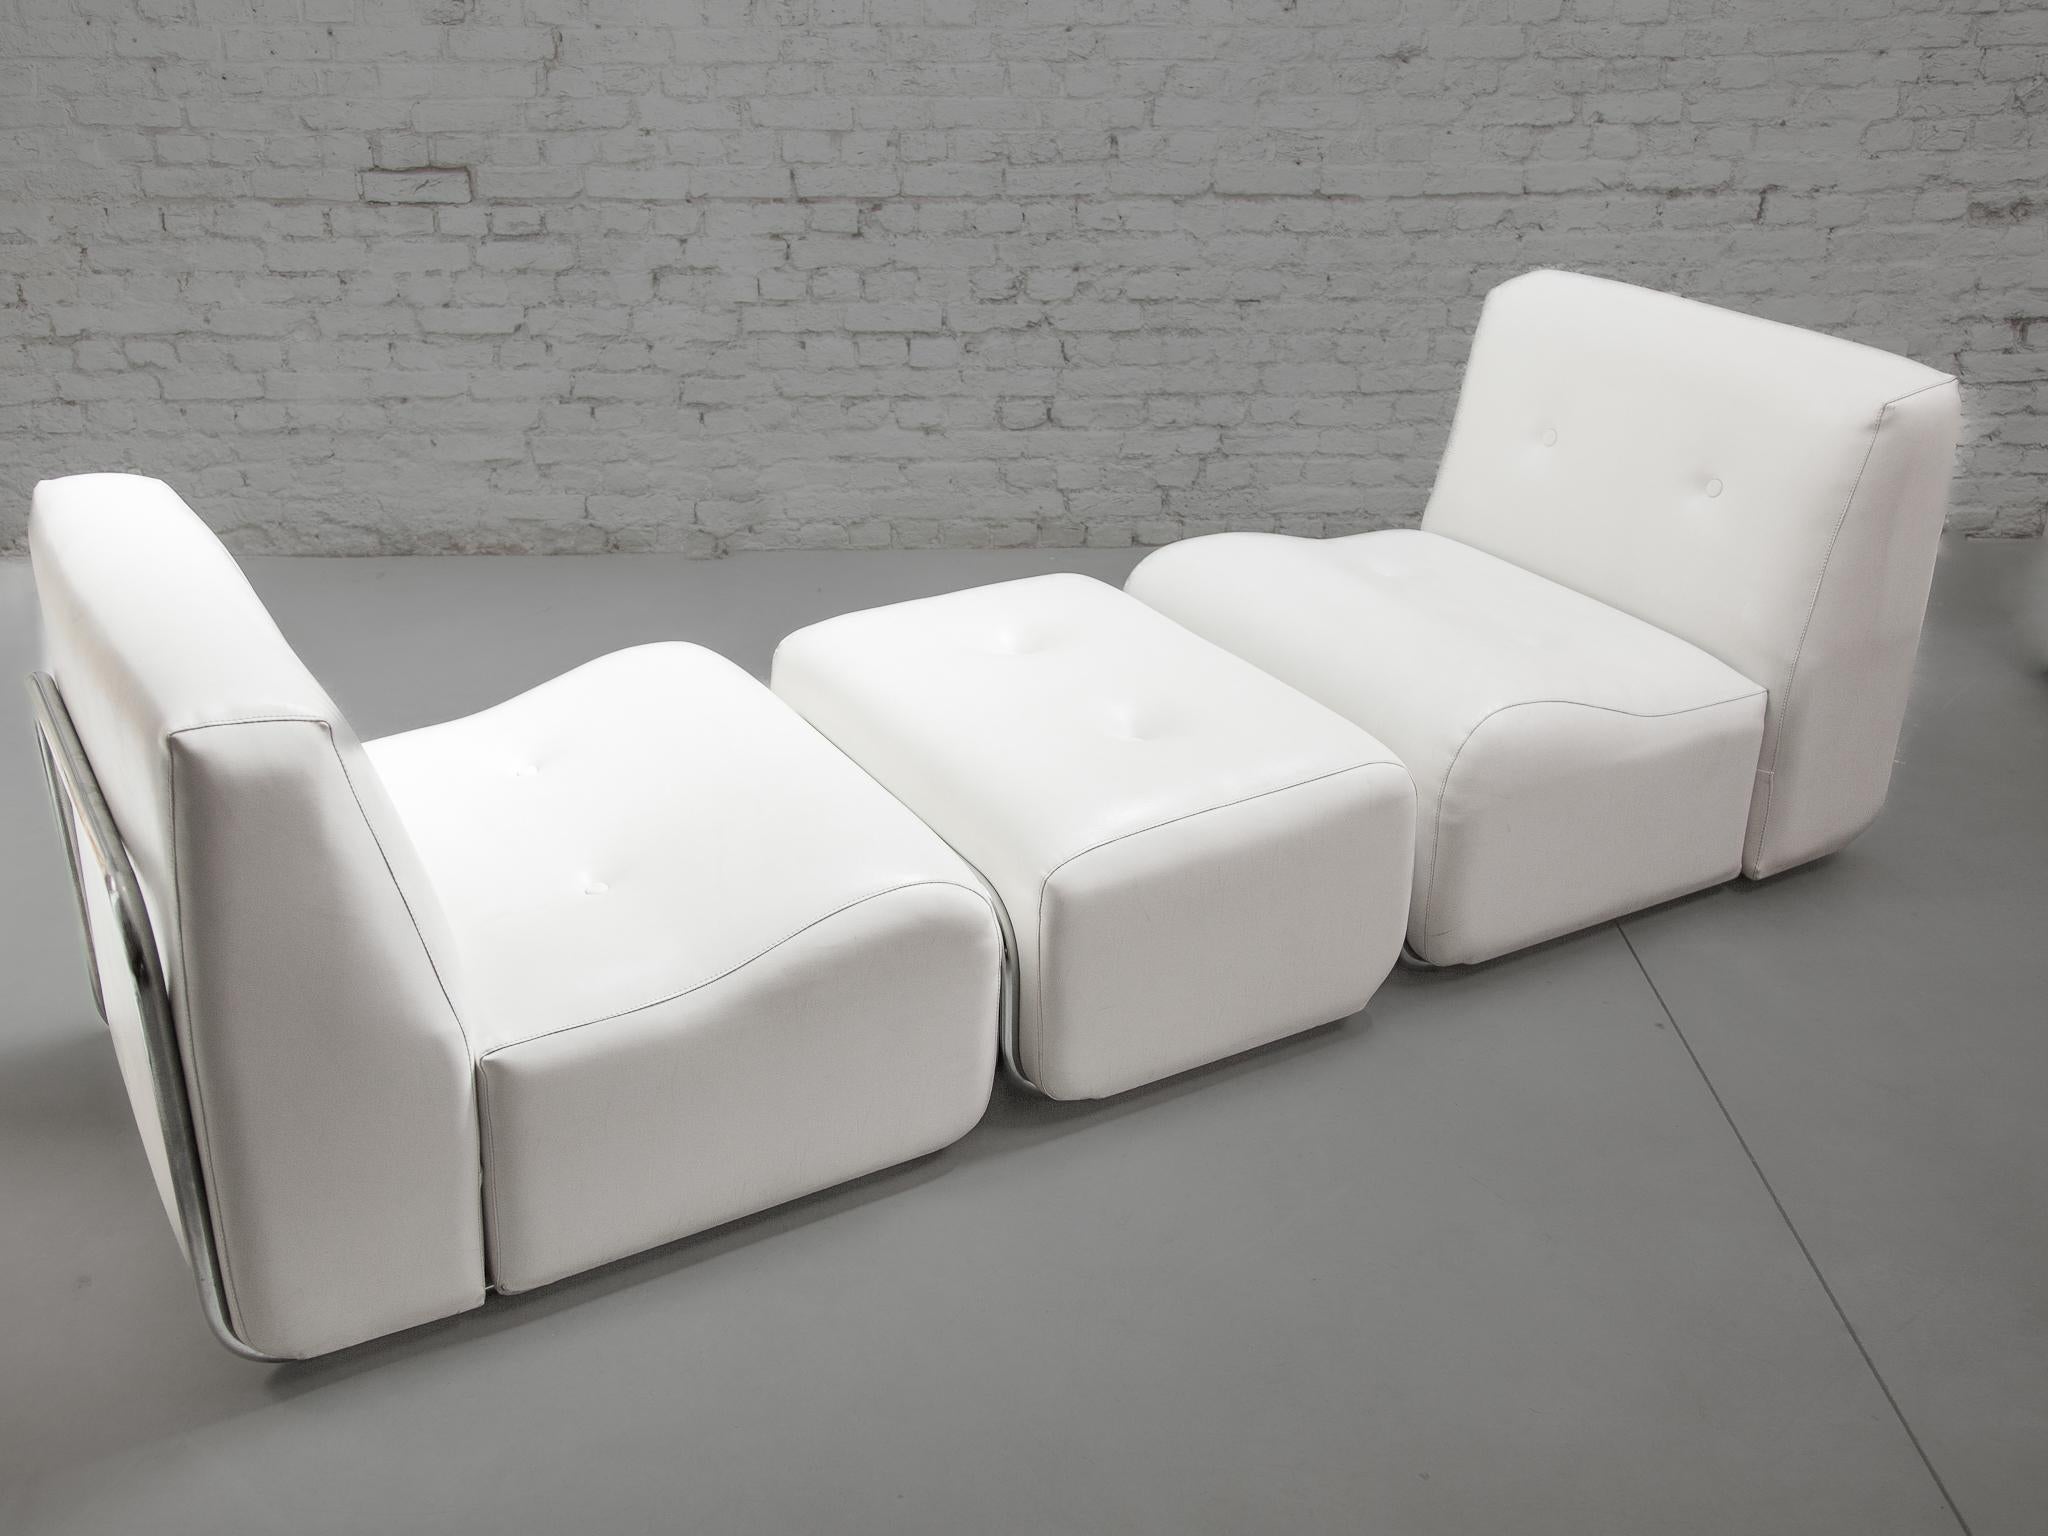 Faux Leather Modular Eight Chairs Living-roomset of Adriano Piazzesi Lounge Chairs and Stools